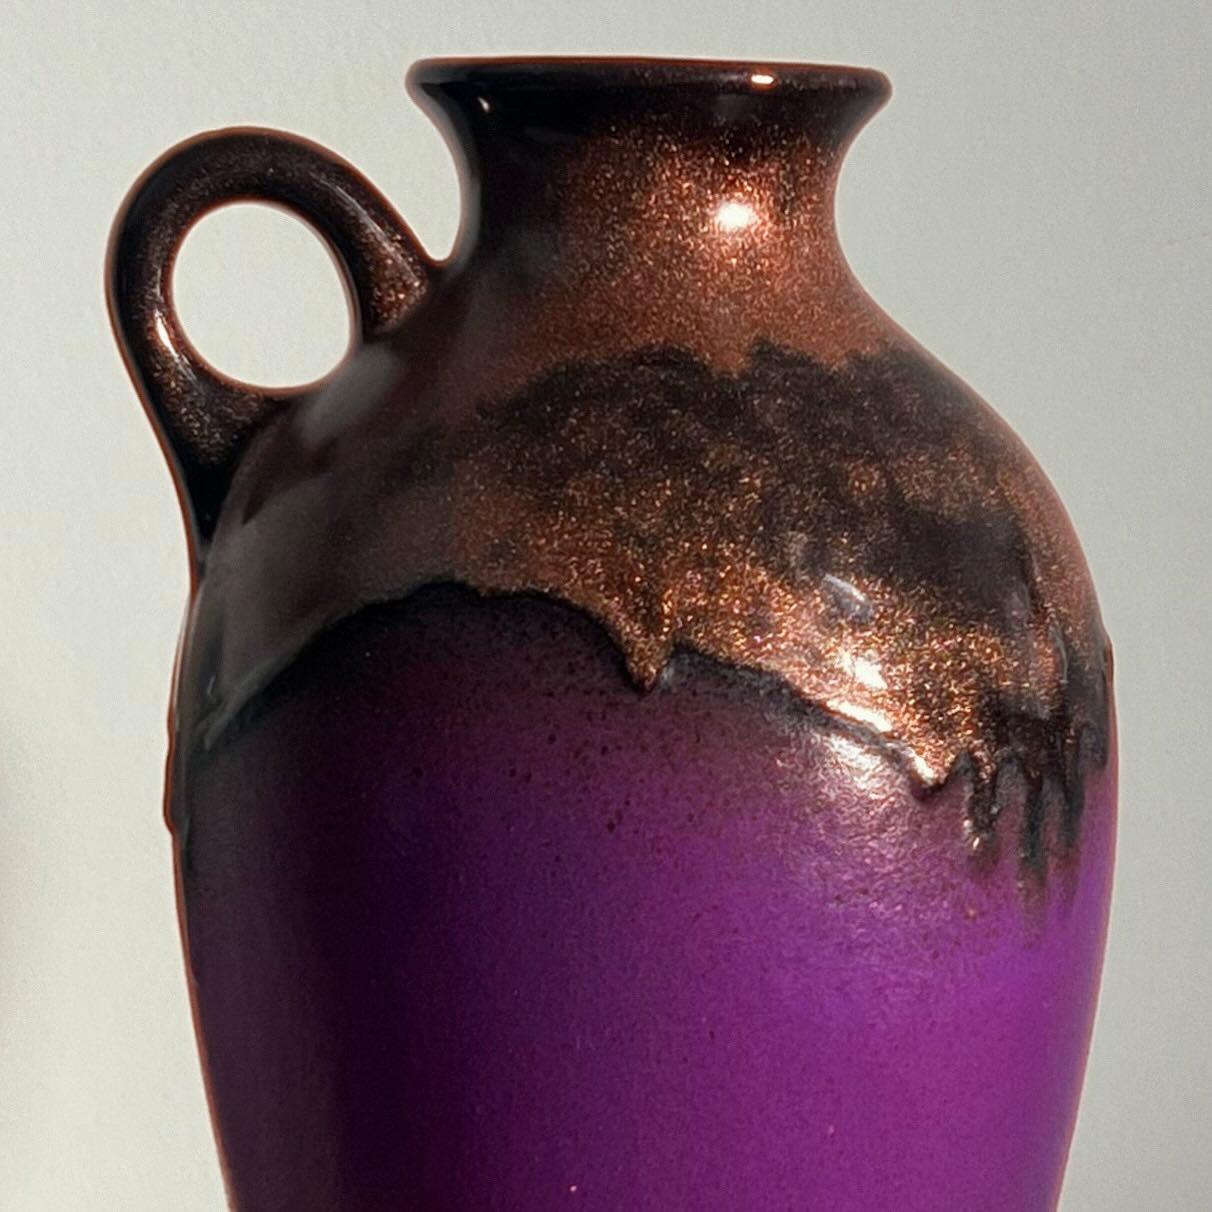 A large mid century ceramic vessel in electric purple by Fohr Keramik, West Germany 1960s. A vase, a jug, a pitcher - have it your way. Note the unique copper dribble along the neck of the vessel: Fohr began using a special glaze technique in the